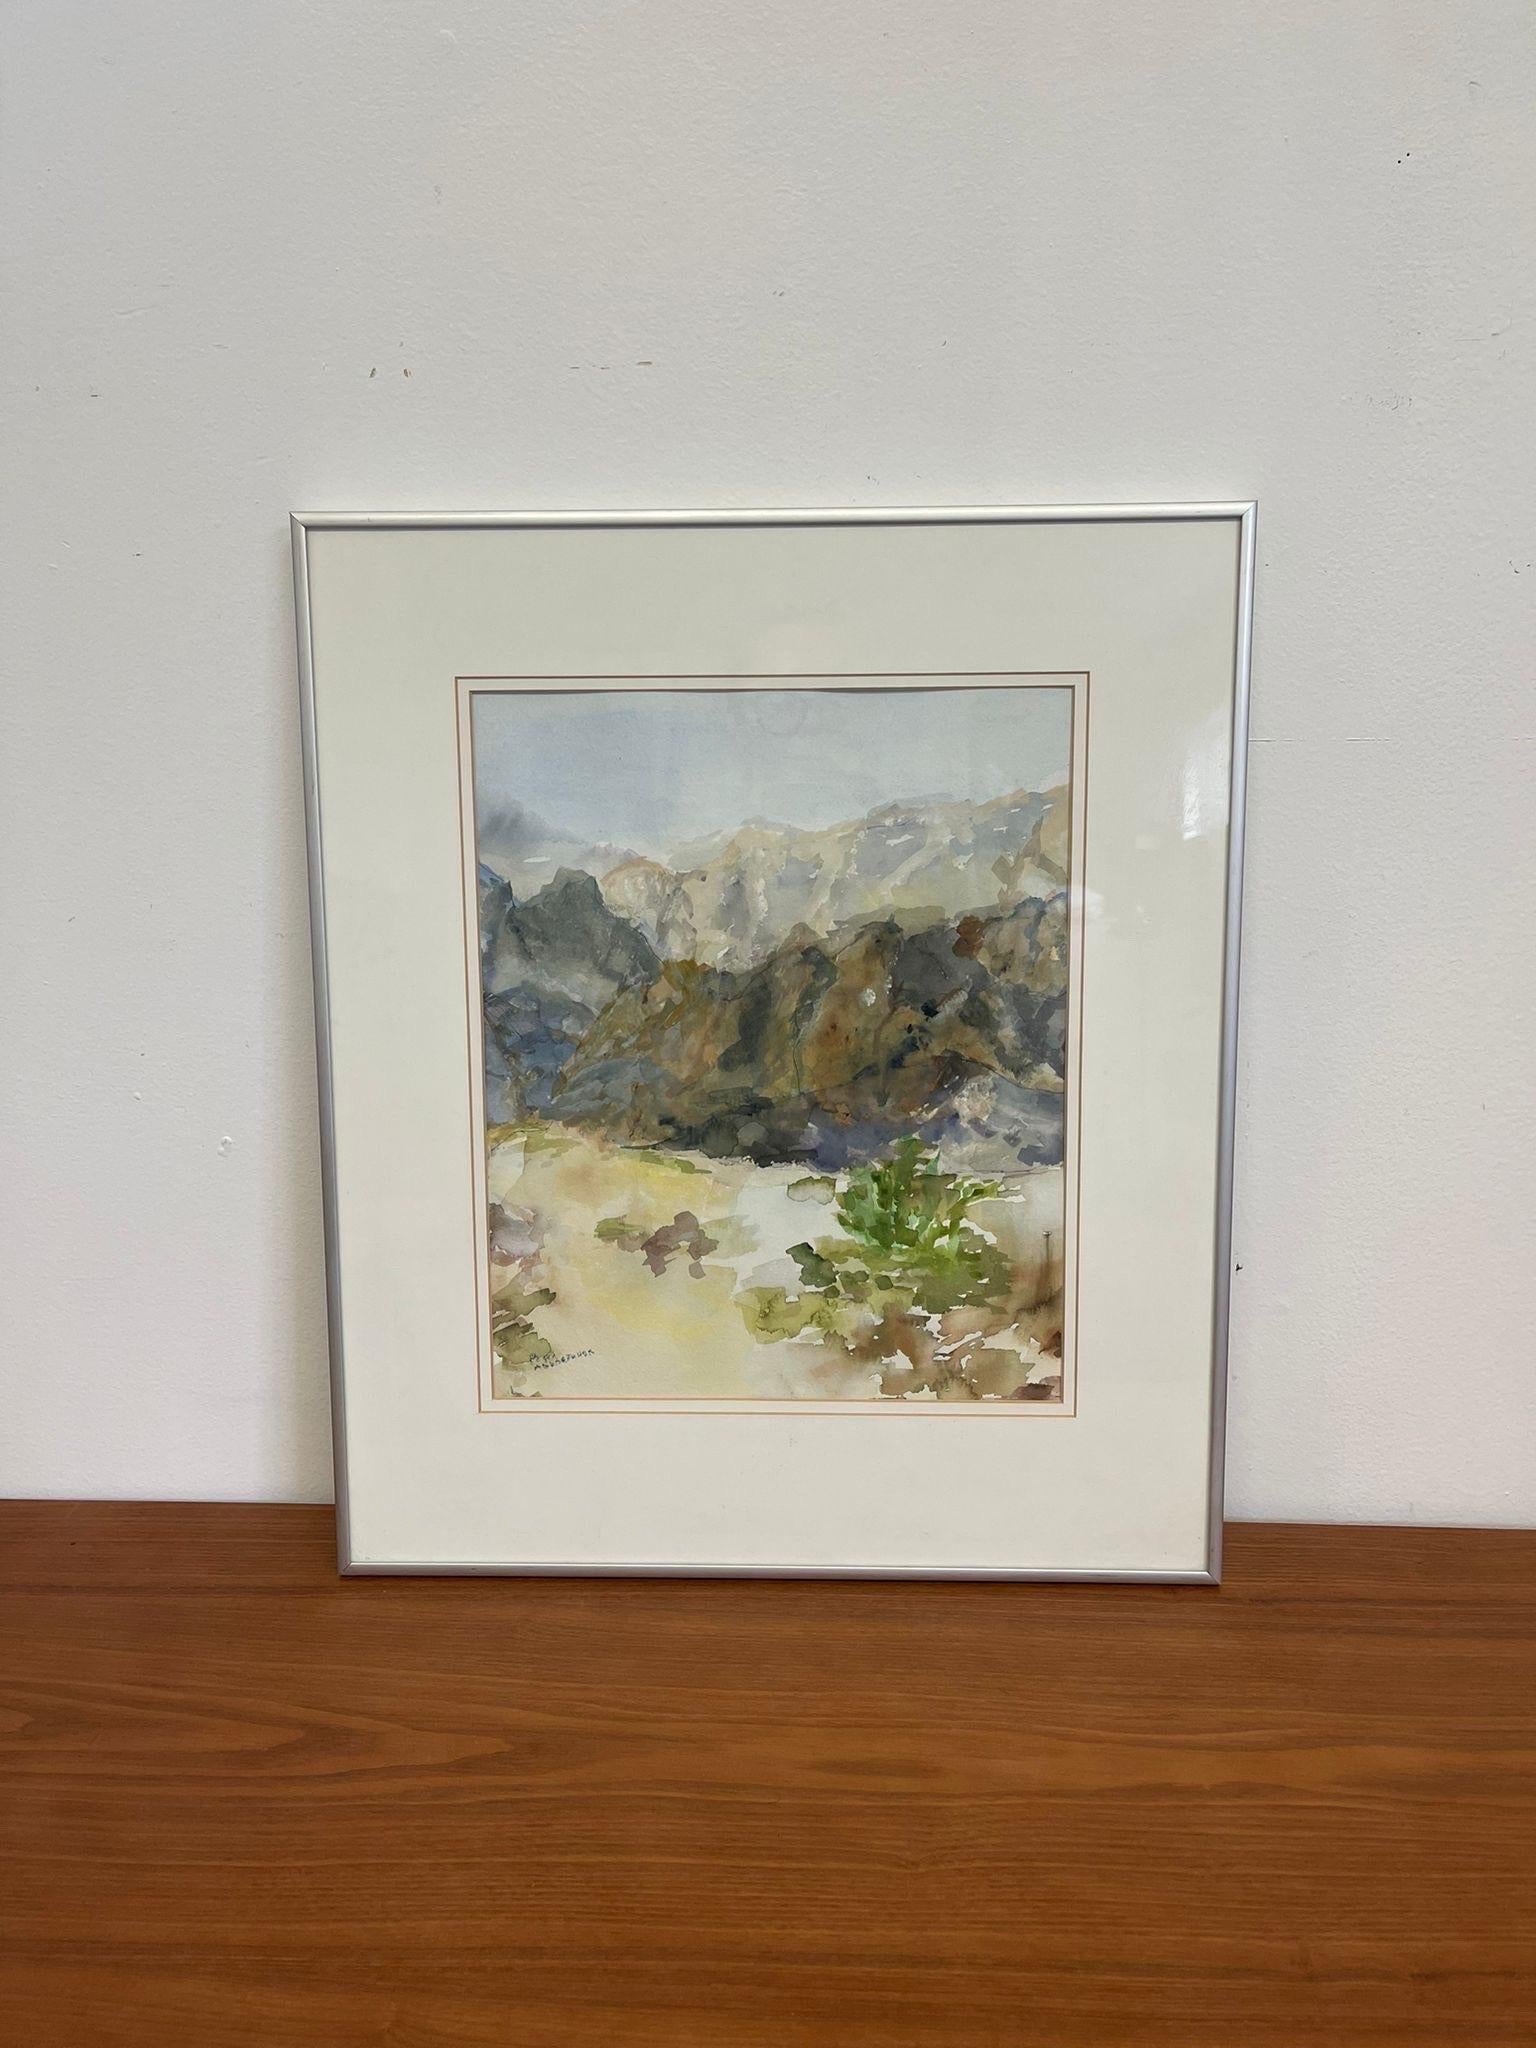 Vintage Watercolor Painting of Landscape on paper within a Silver Toned Frame. Signed in the Lower Left Hand Corner by Artist . Vintage Condition Consistent with Age as Pictured.

Dimensions. 17 W ; 1/4 D ; 20 H